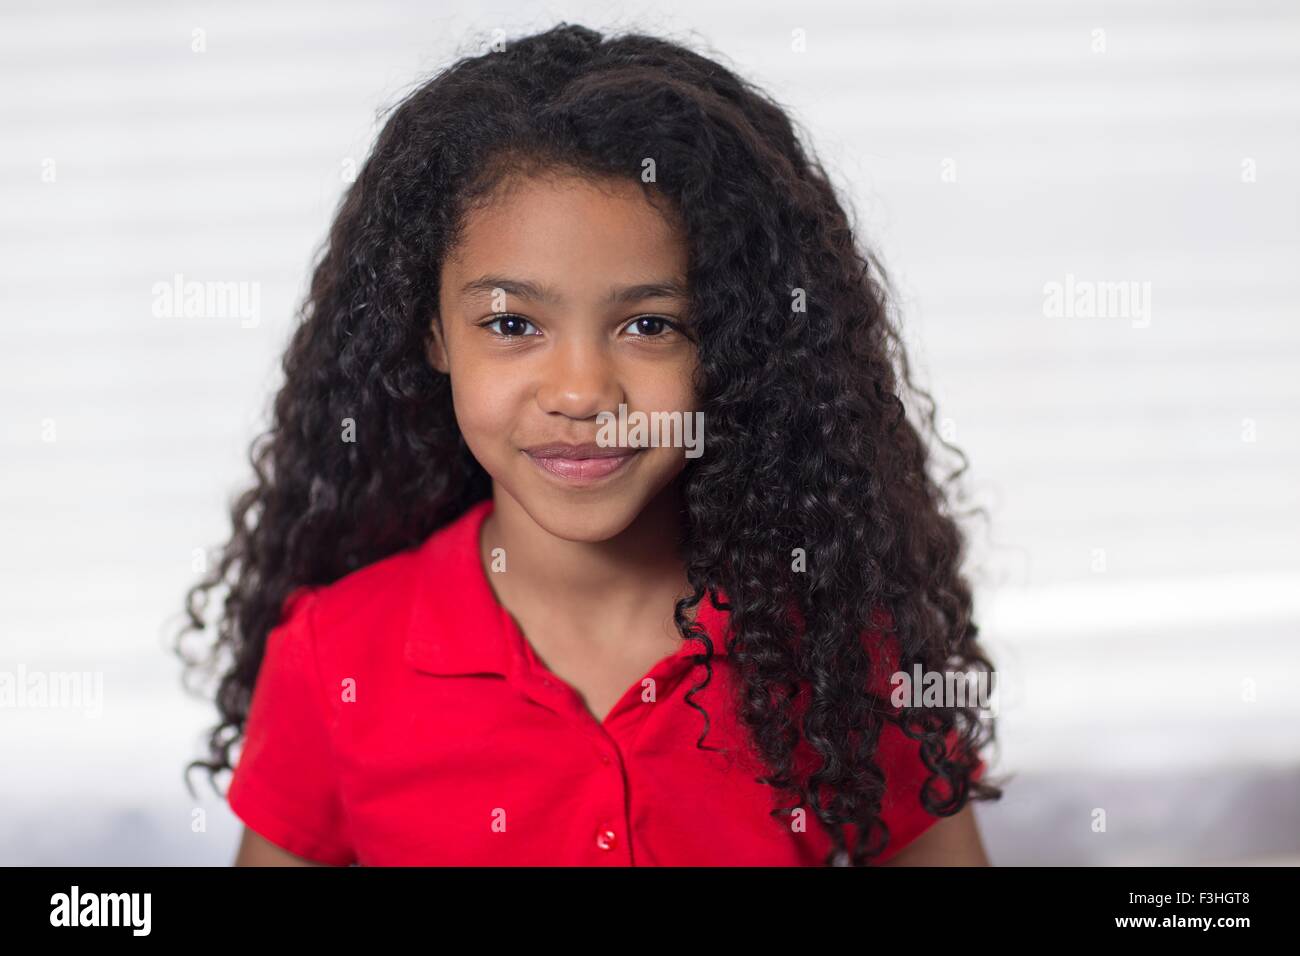 Portrait of girl with curly black hair looking at camera smiling Stock Photo